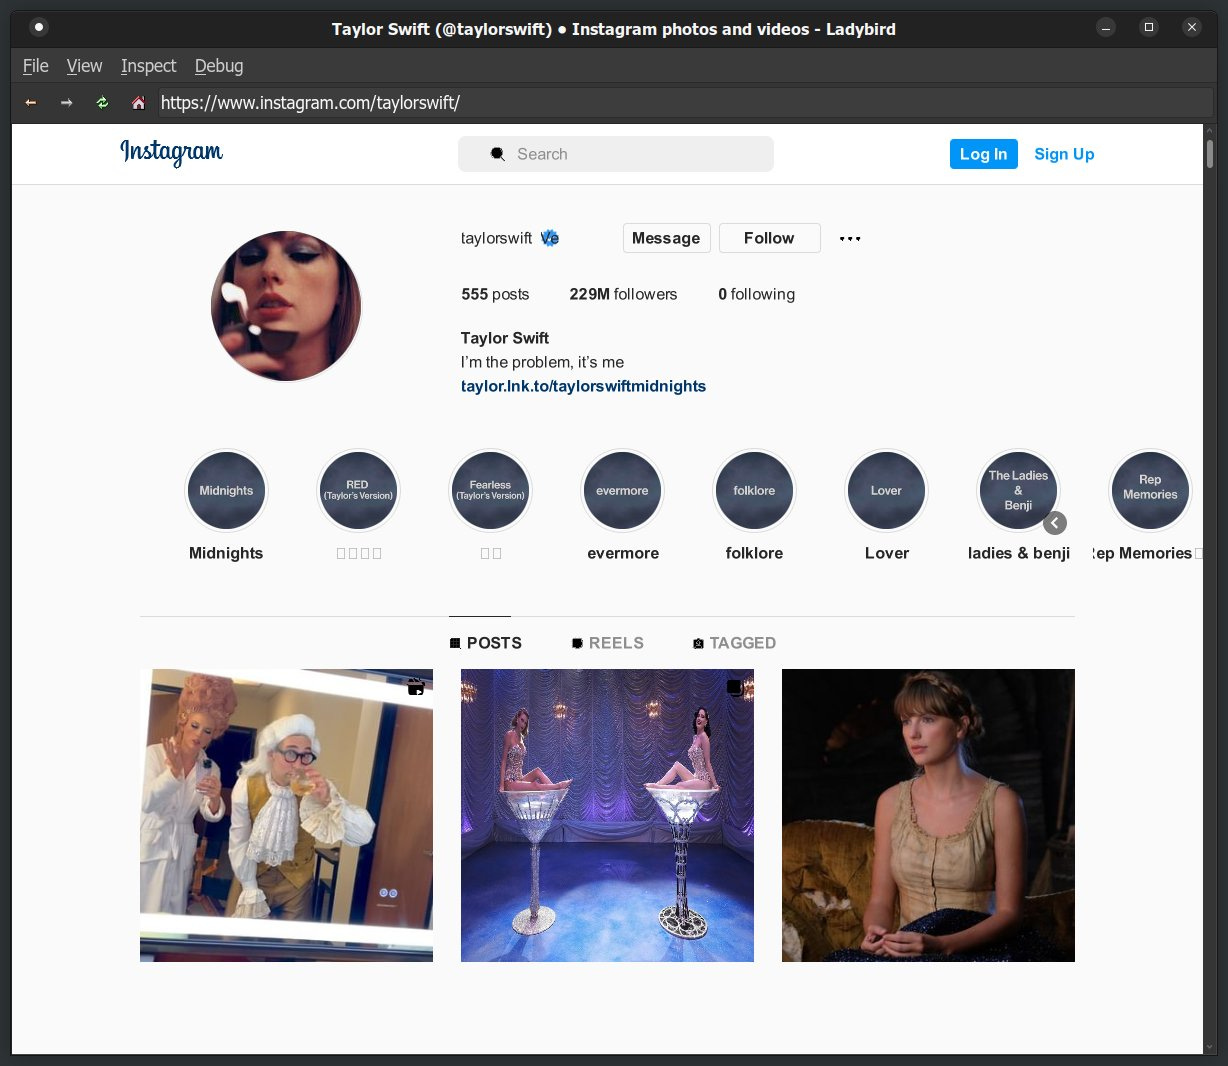 Screenshot of Taylor Swift's Instagram profile viewed in the Ladybird web browser.